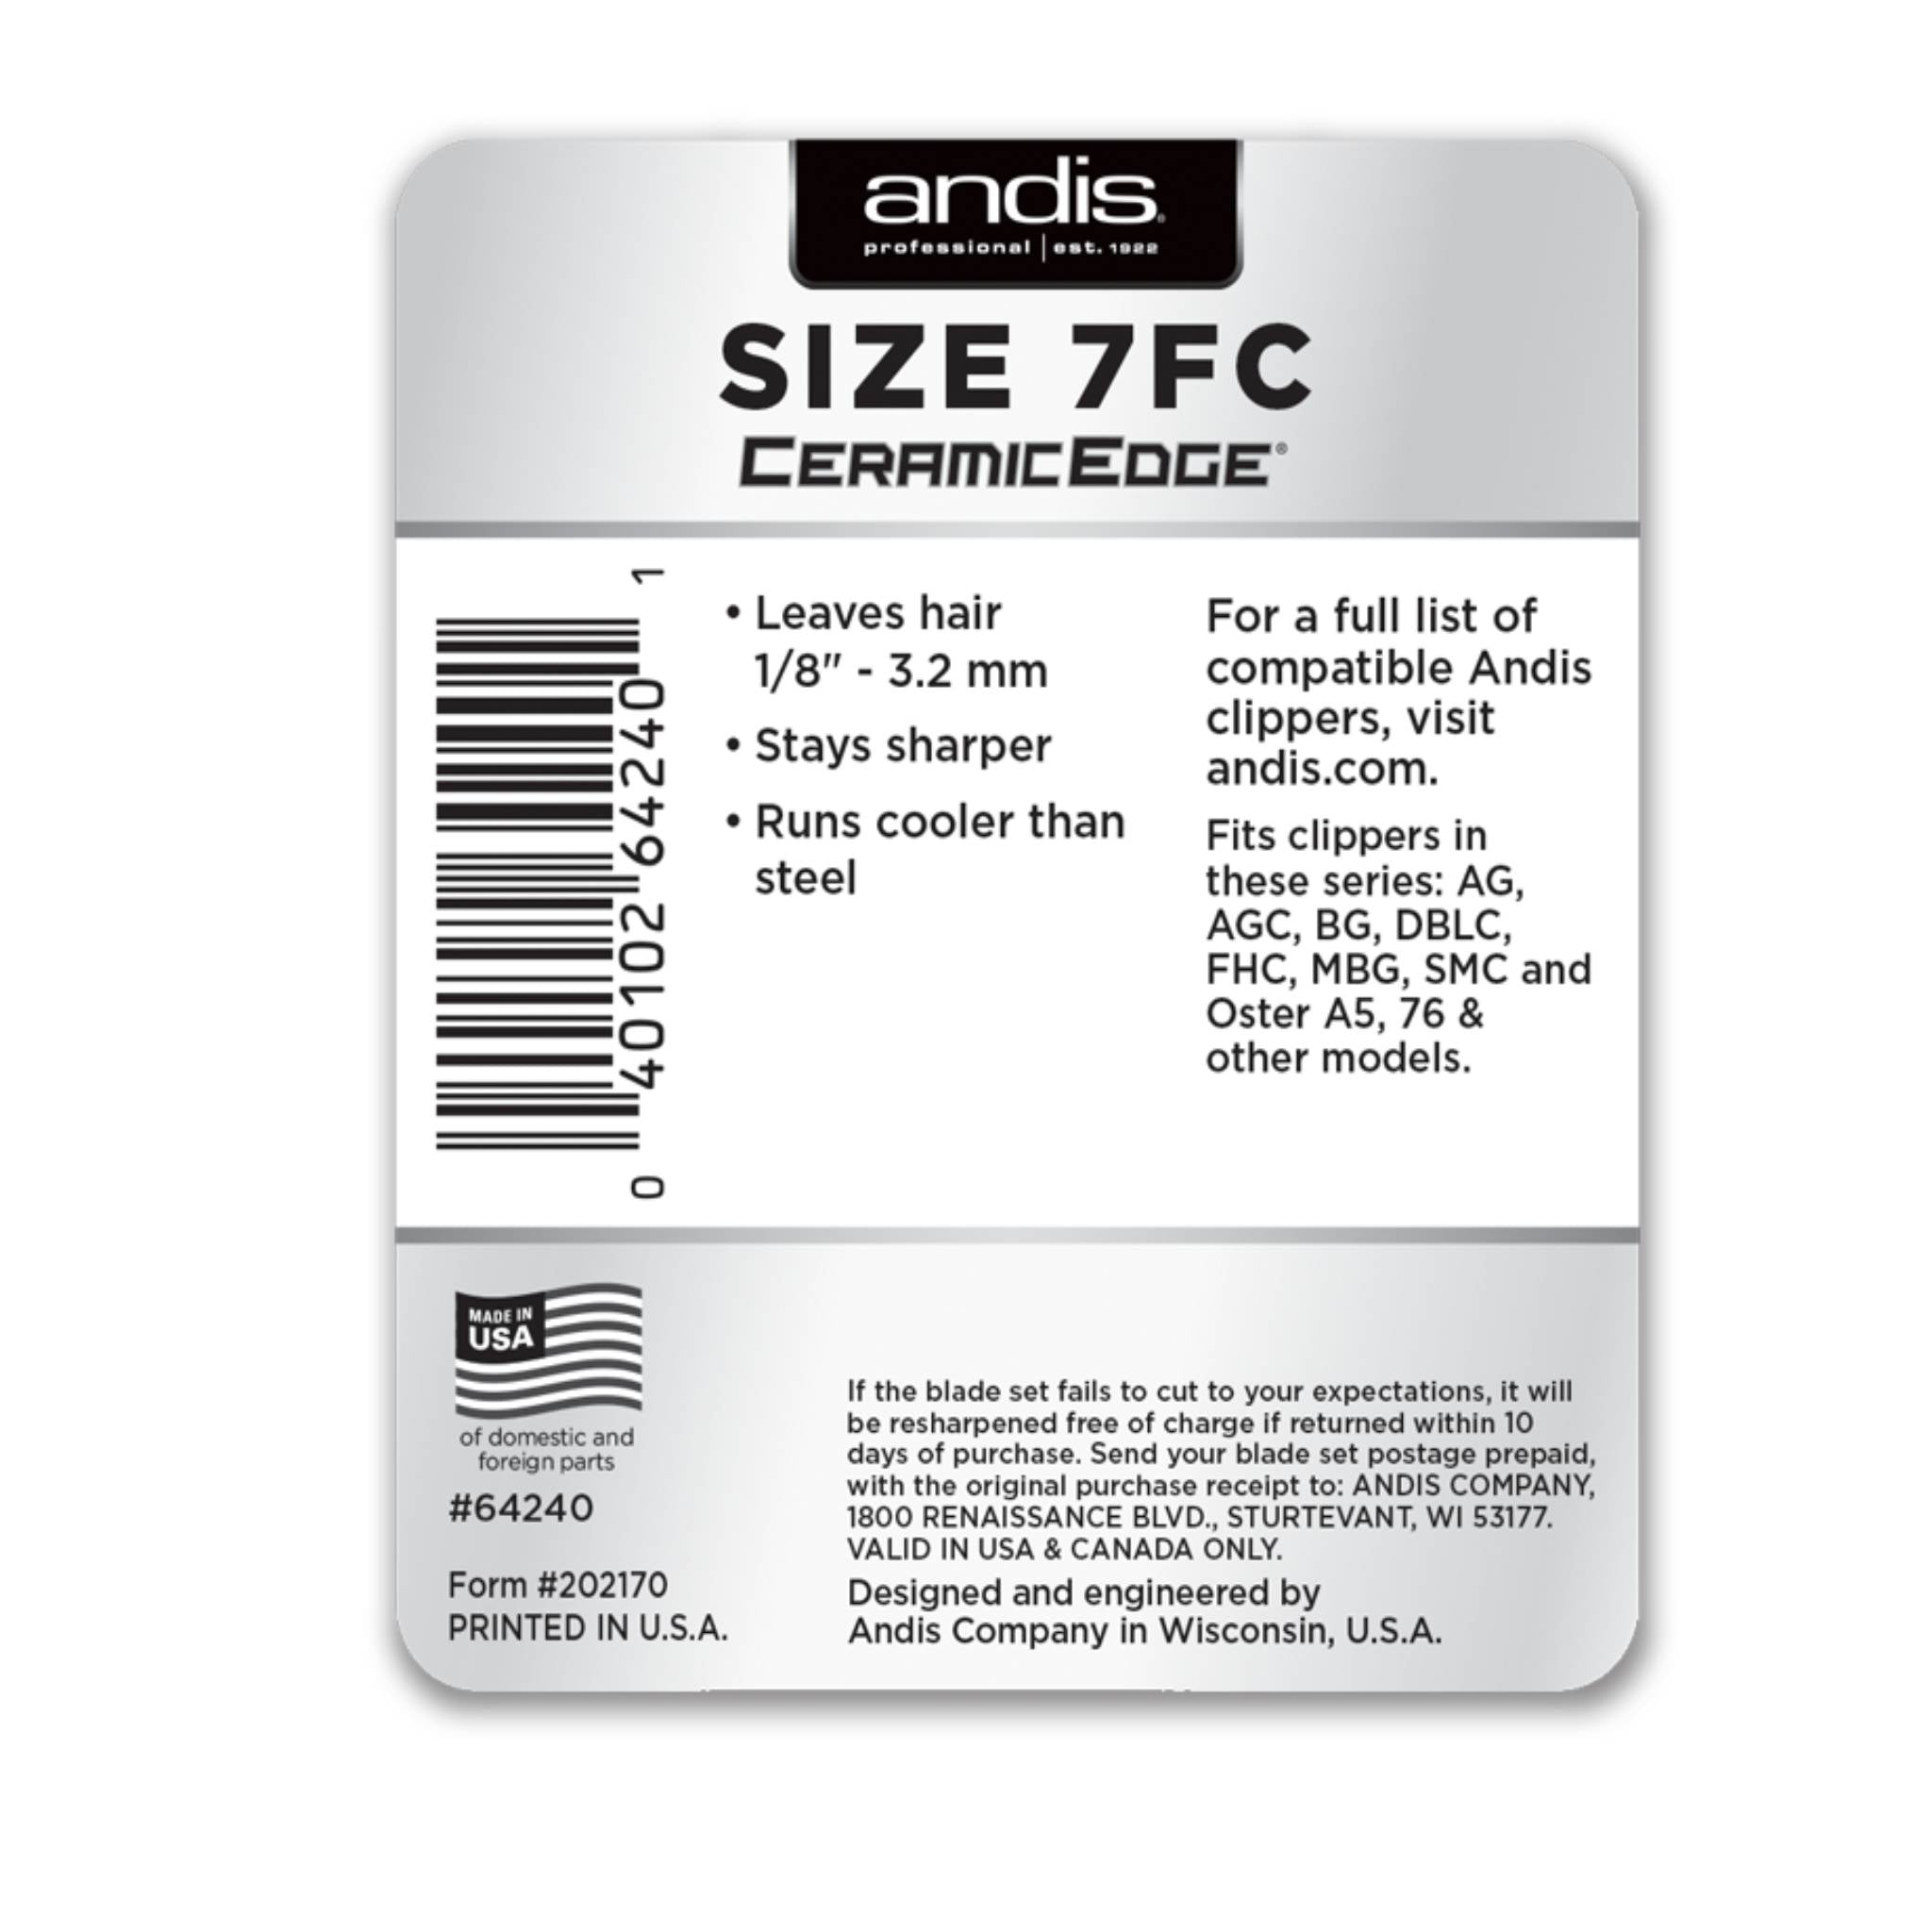 Andis CeramicEdge Blade Size 7FC Pack of 2